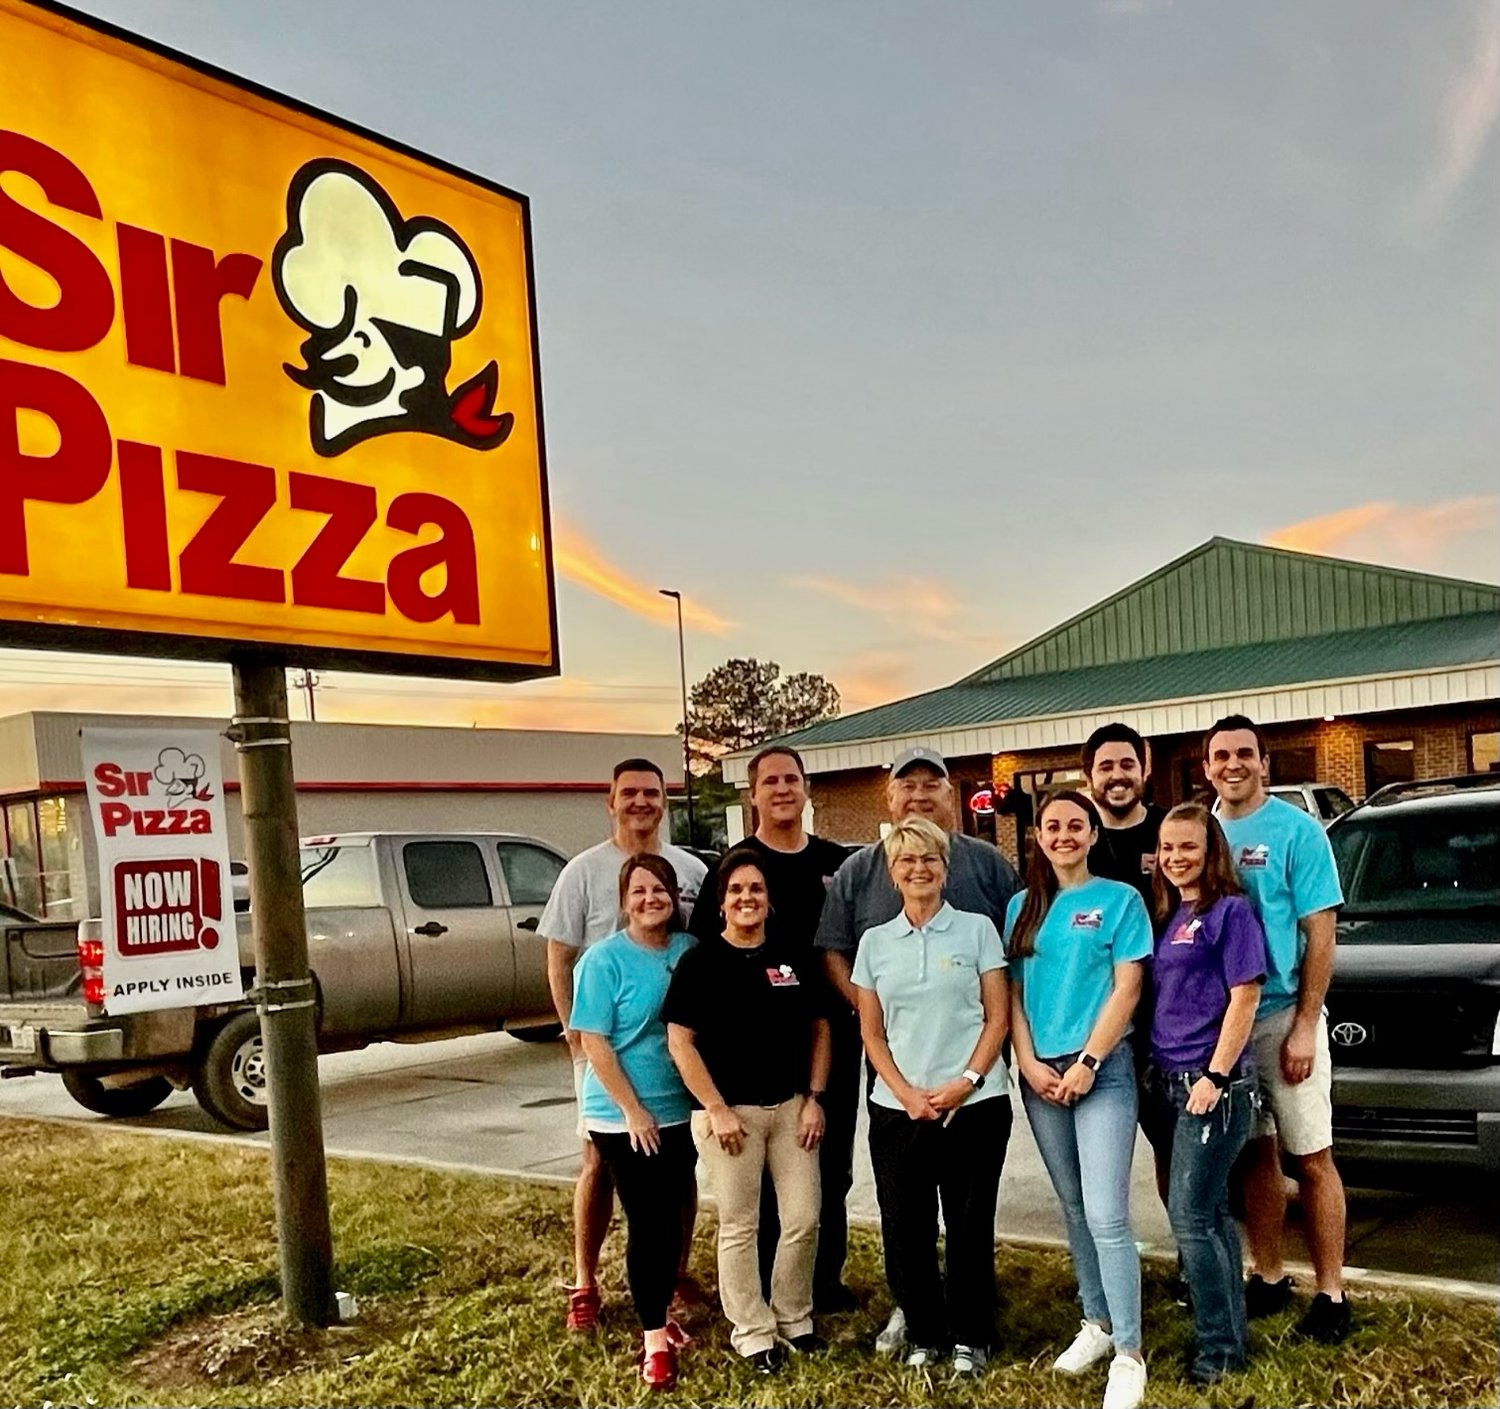 Former Sir Pizza owners Jeff and Ann Shaw (back and front center) standing with members of the Edminsten and Cox families, the restaurant's new owners.